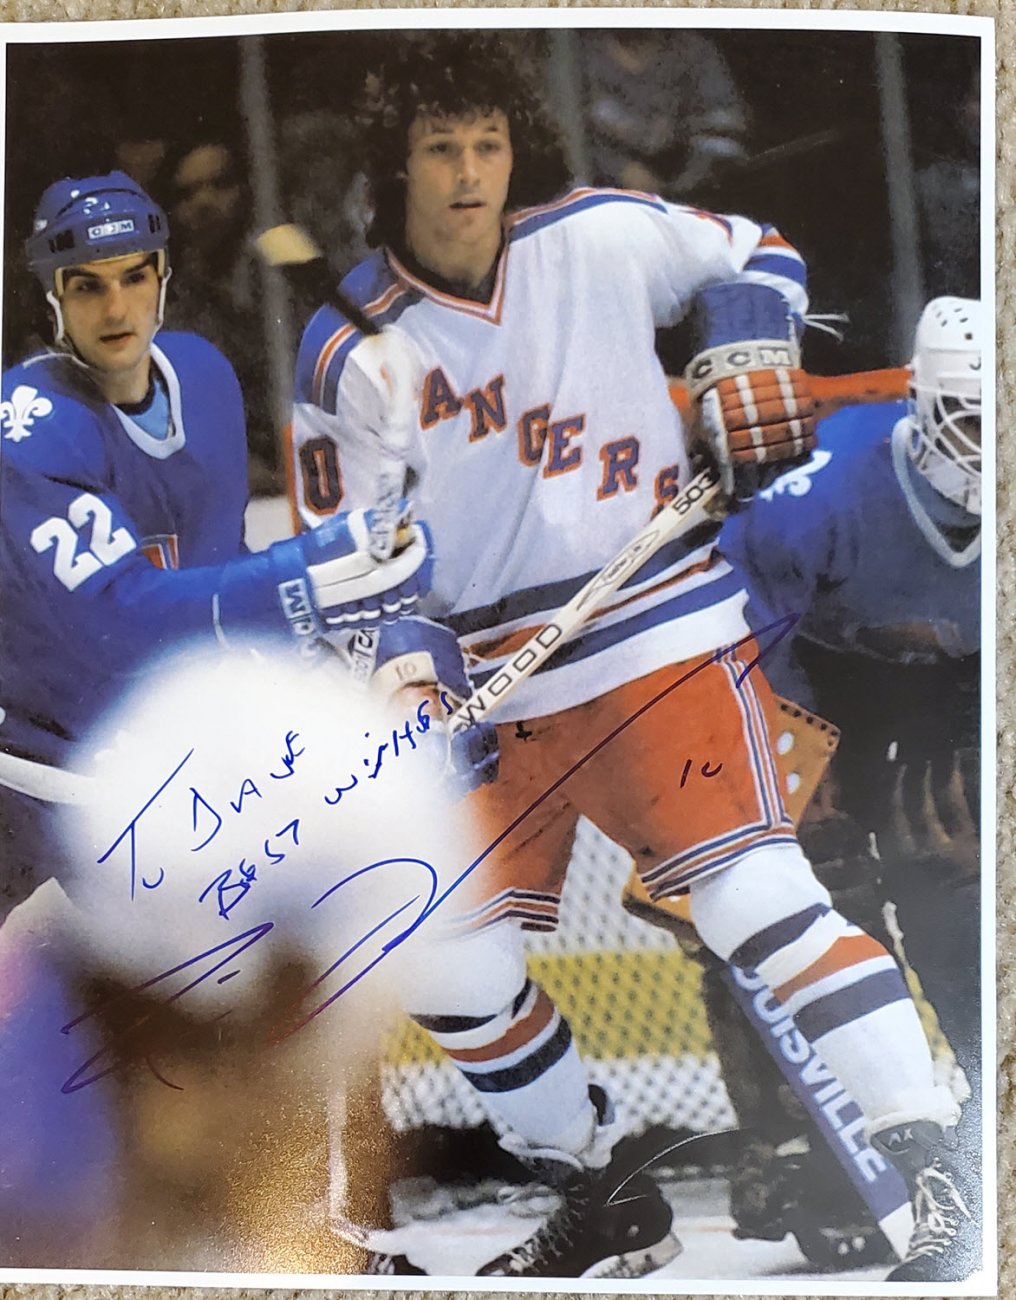 Ron Duguay Former New York Ranger Private Signing Feb 19th, 2022